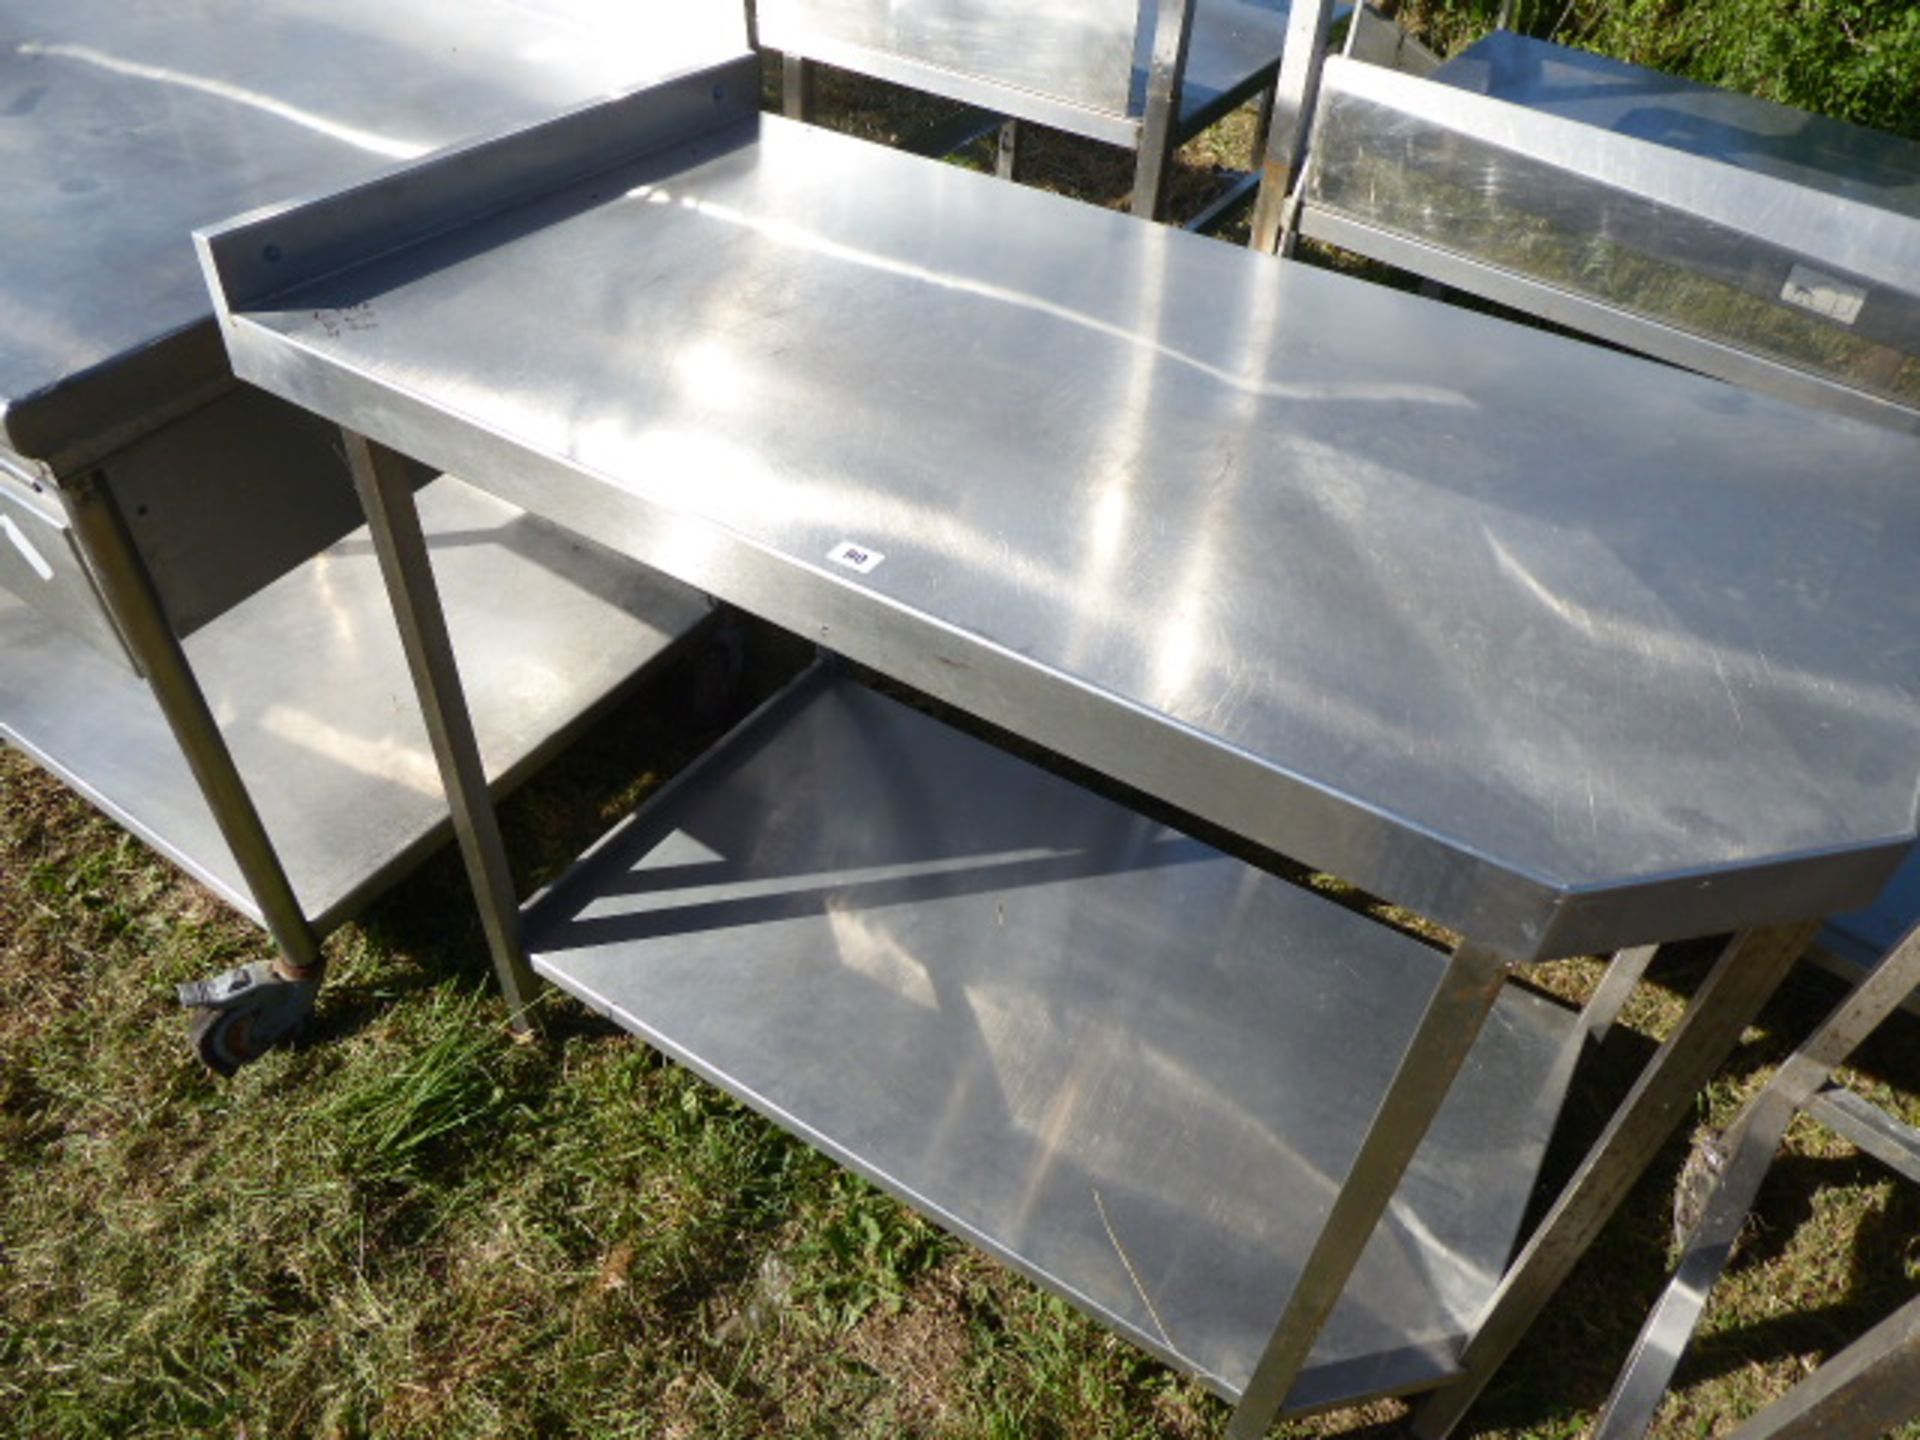 Stainless steel table with shelf under, with a small cut out corner,1880mm wide, 650mm deep and - Image 2 of 2